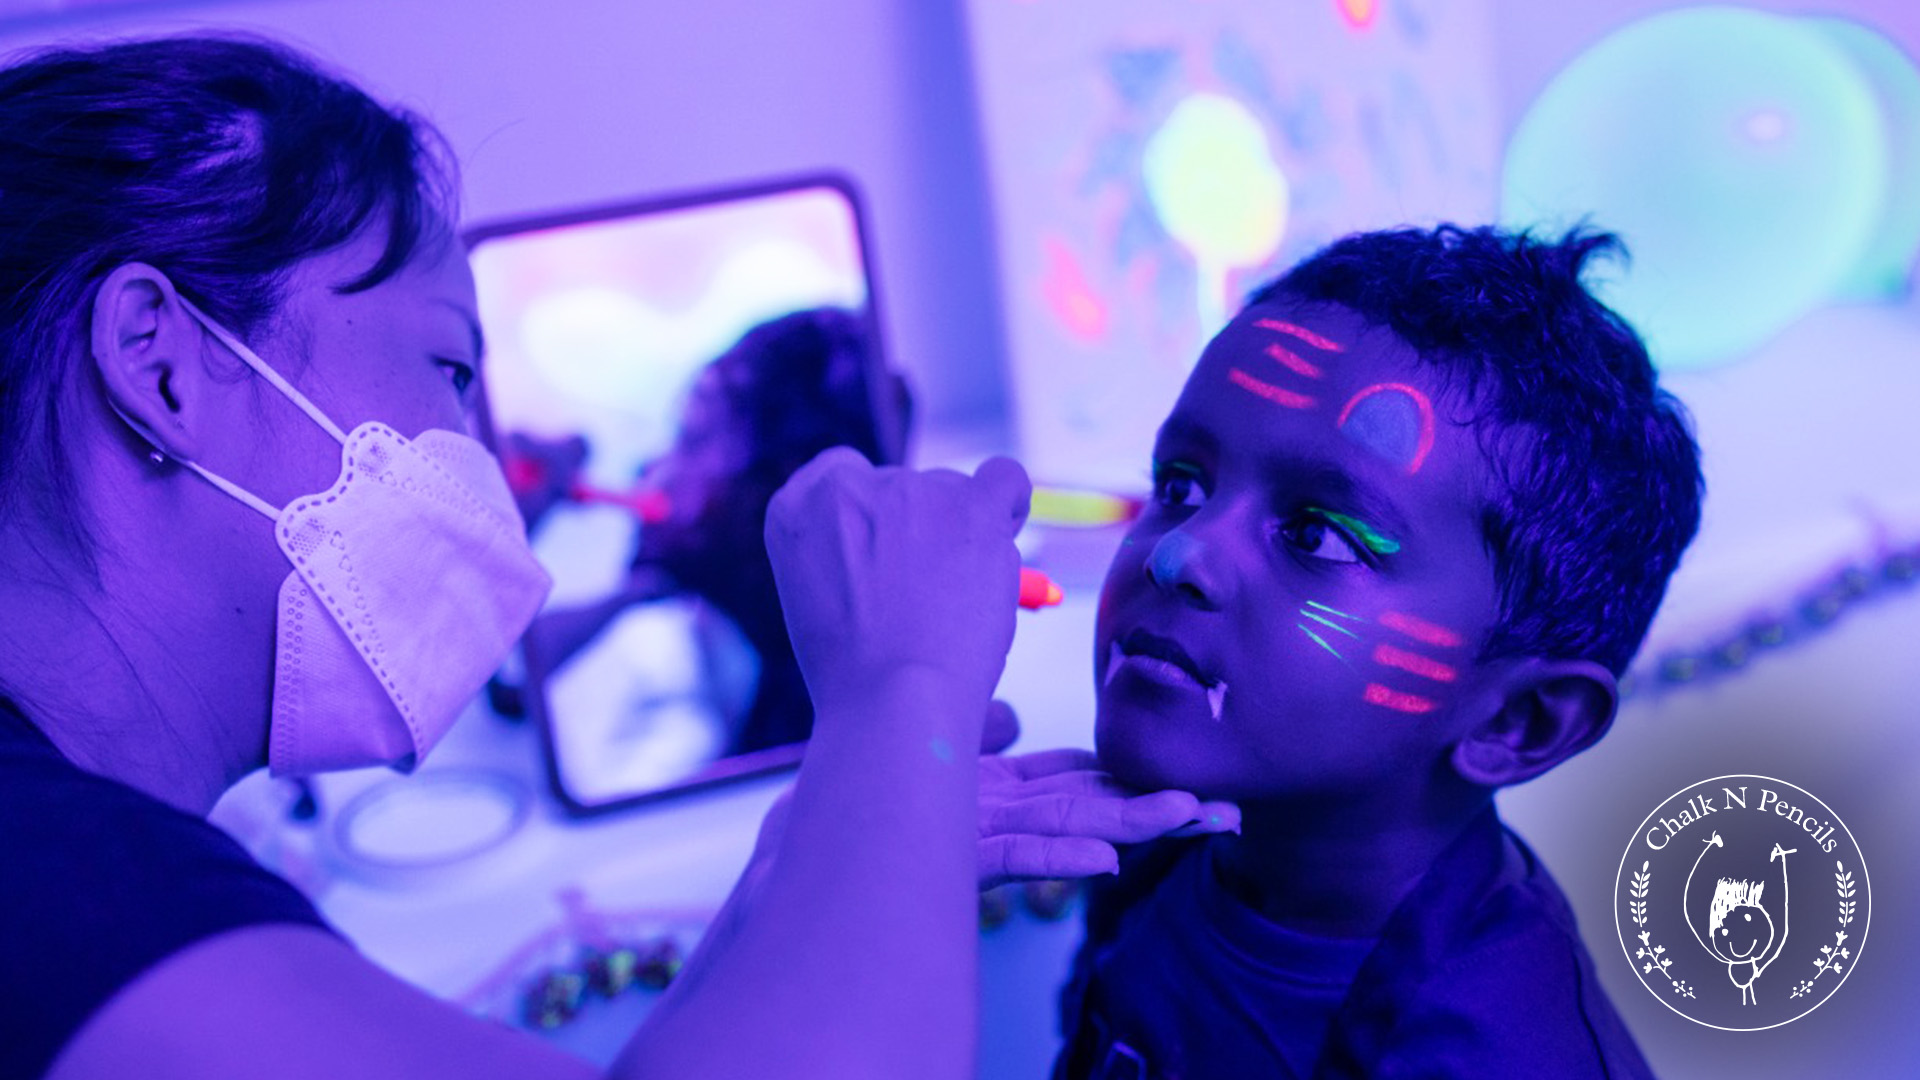 Add a creative activity like face painting to your kid's birthday party to